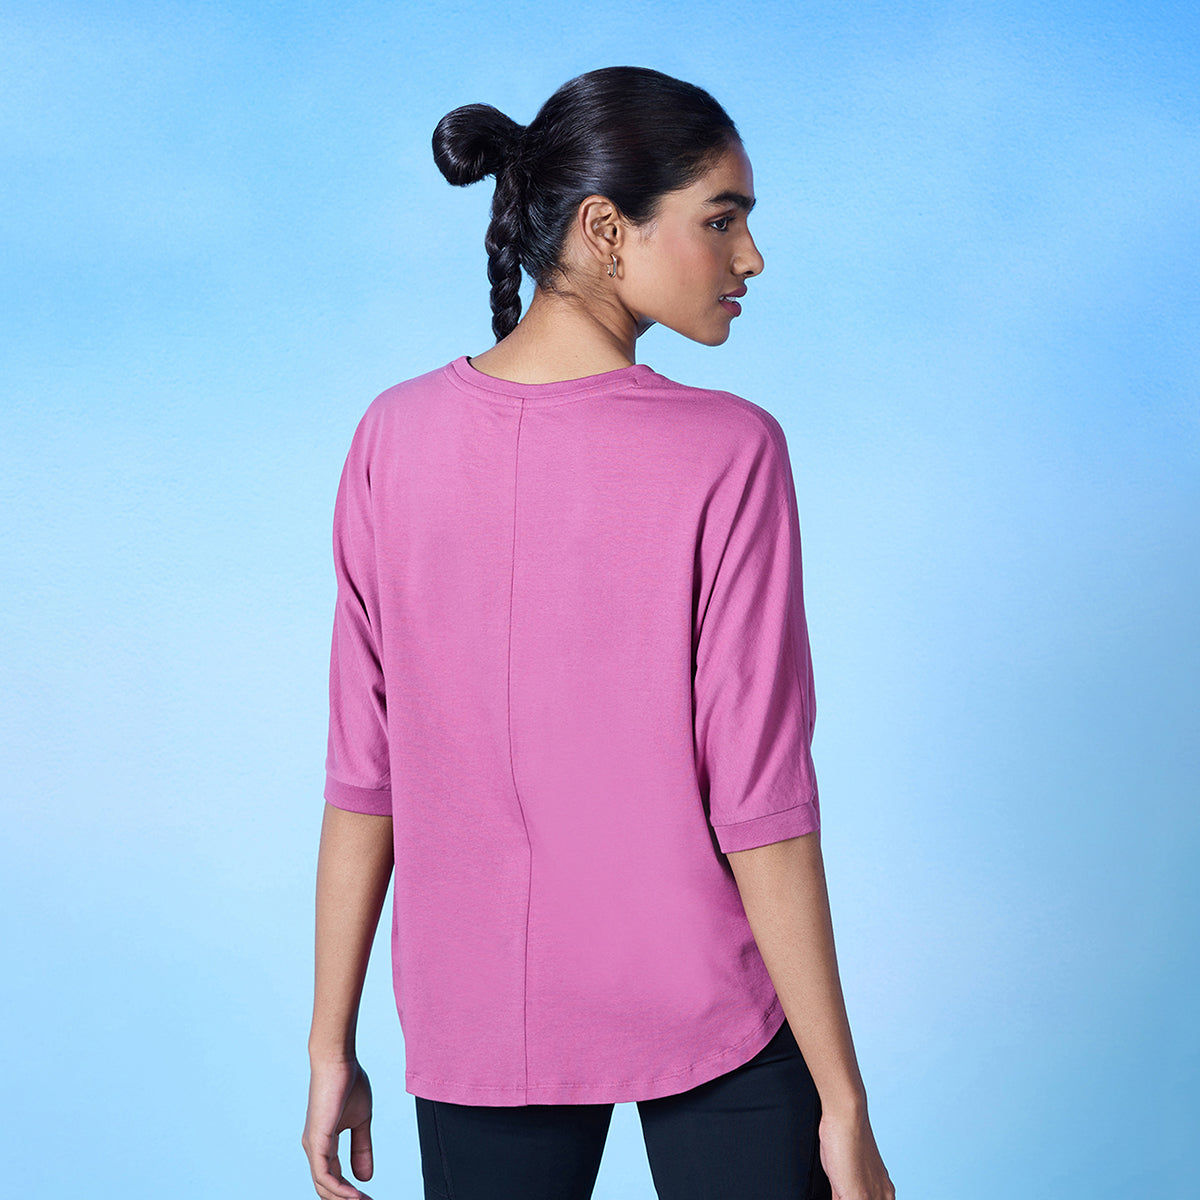 Nykd All Day Cotton Dolman Tee - NYLE278 - Red violet